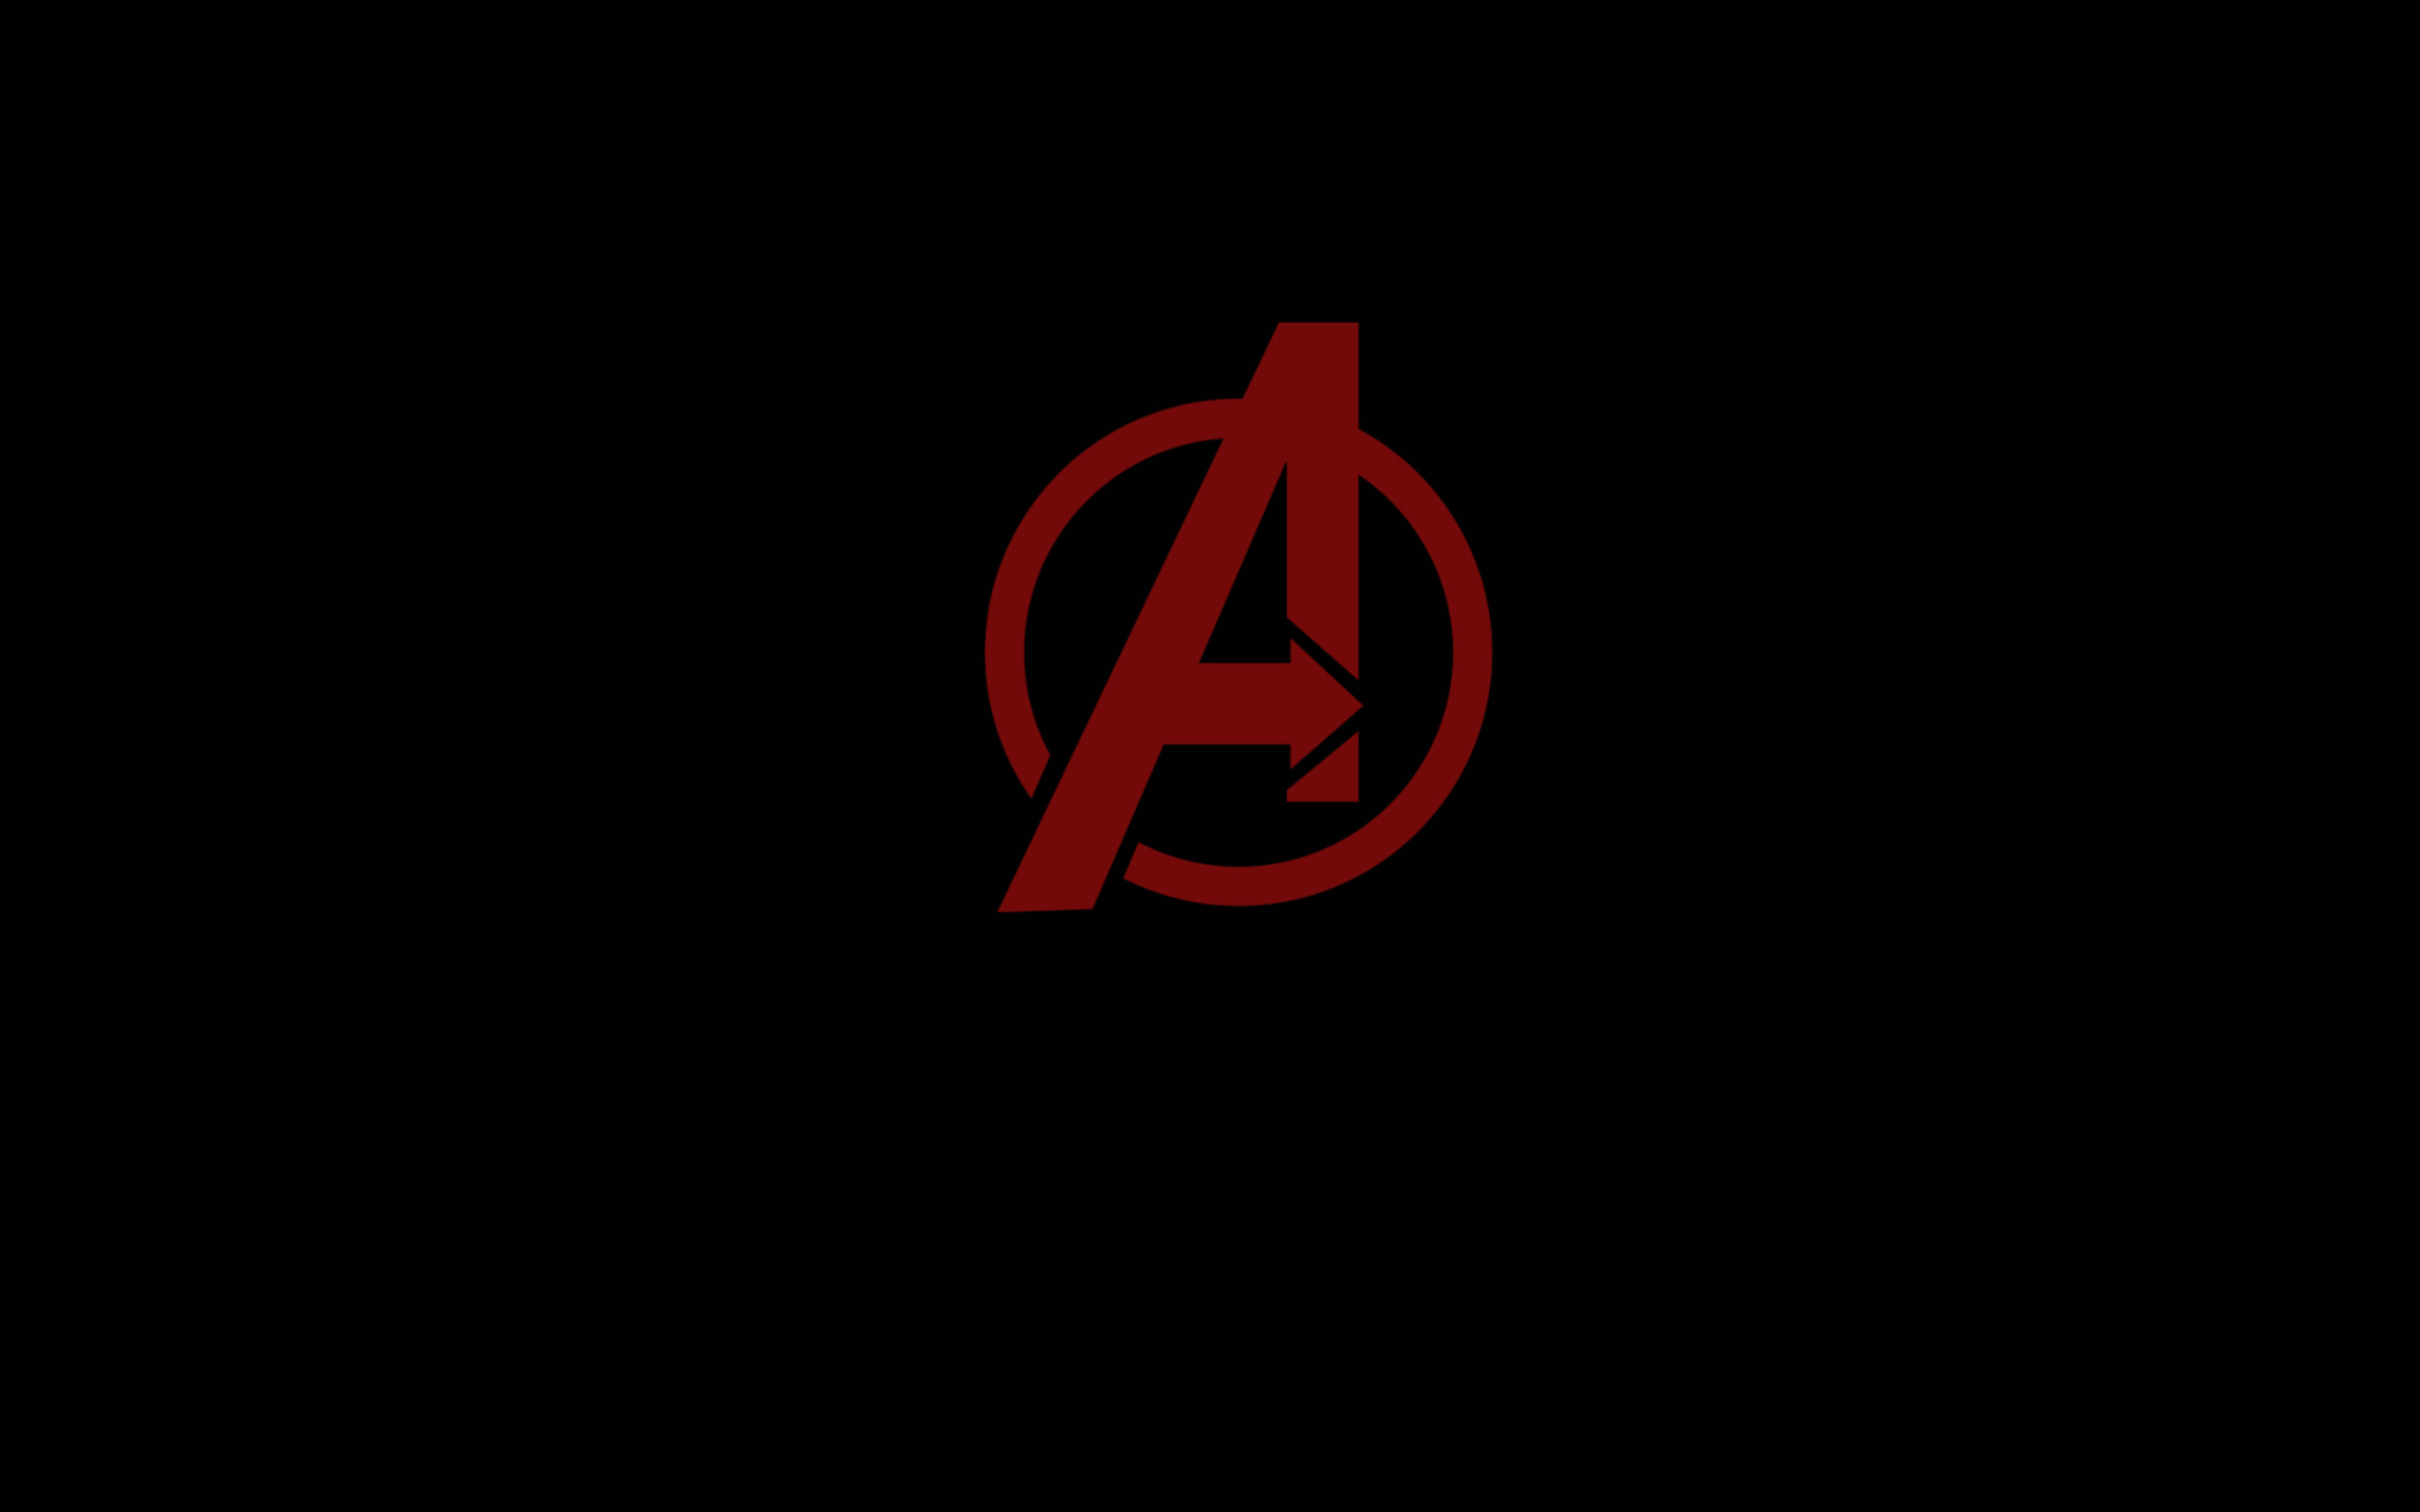 The Avengers Logo by Marvel on the Screen Editorial Photo - Image of  avengers, american: 225841686